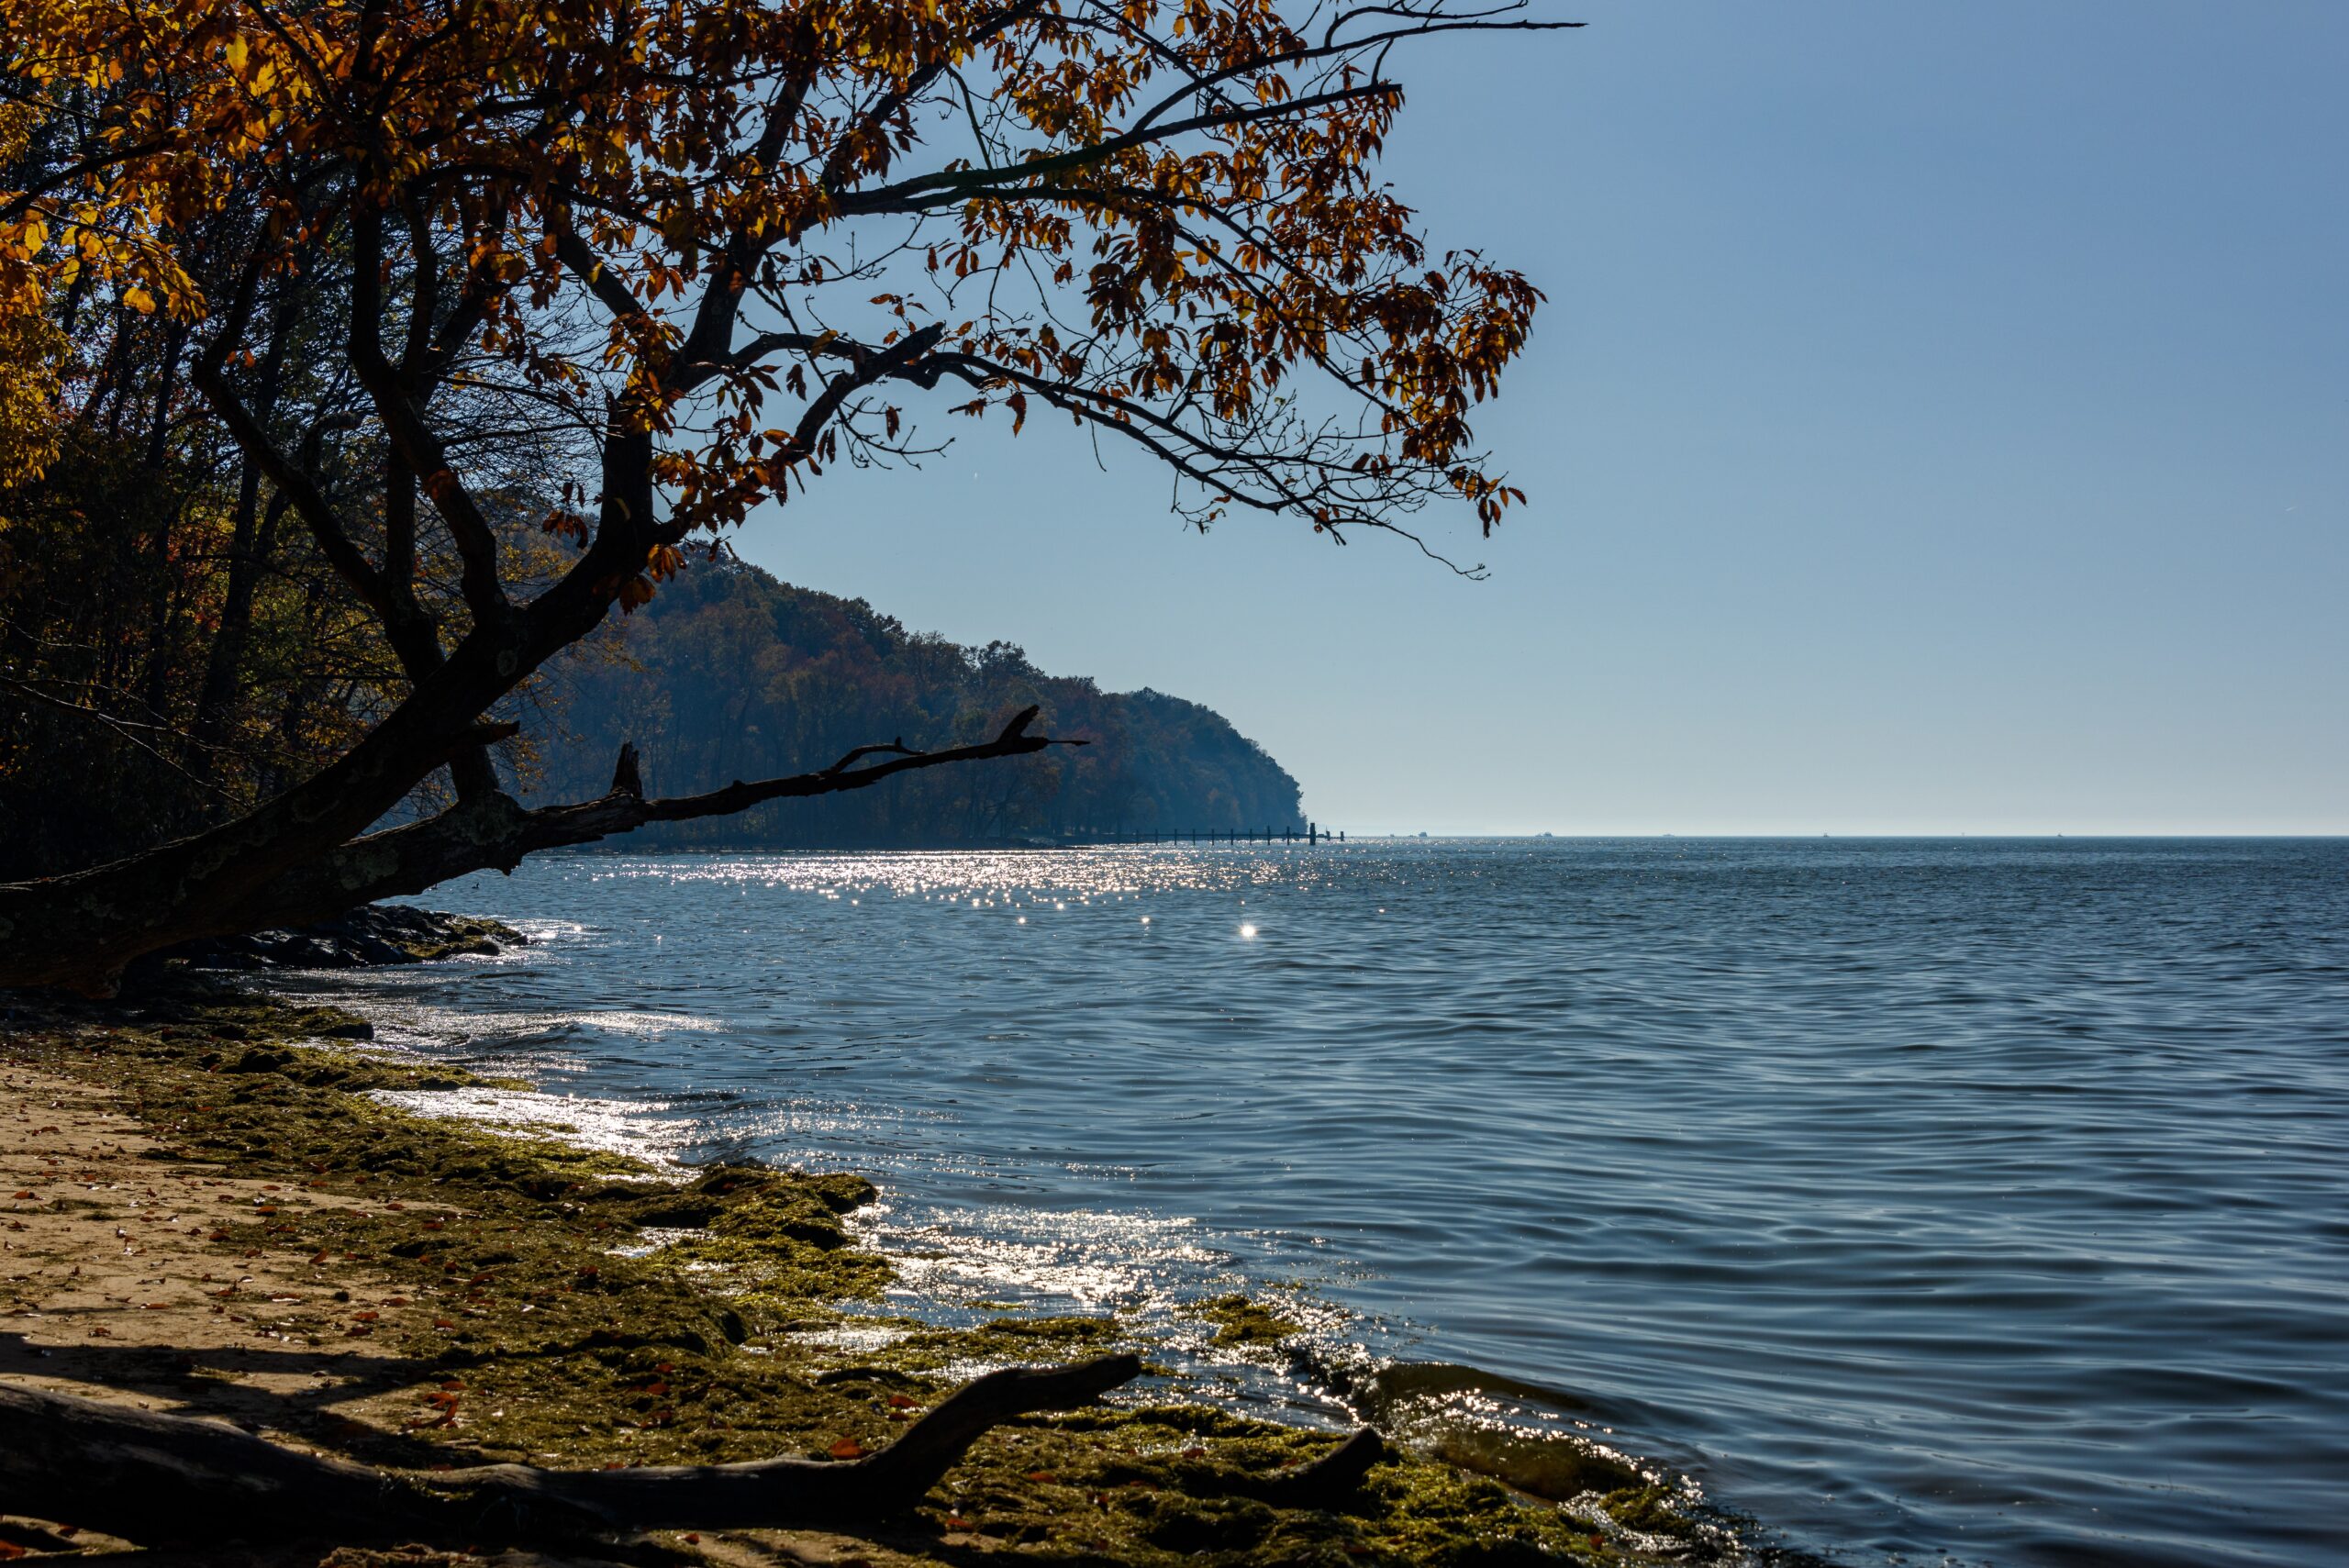 A view of the Chesapeake Bay near Northeast, Maryland.